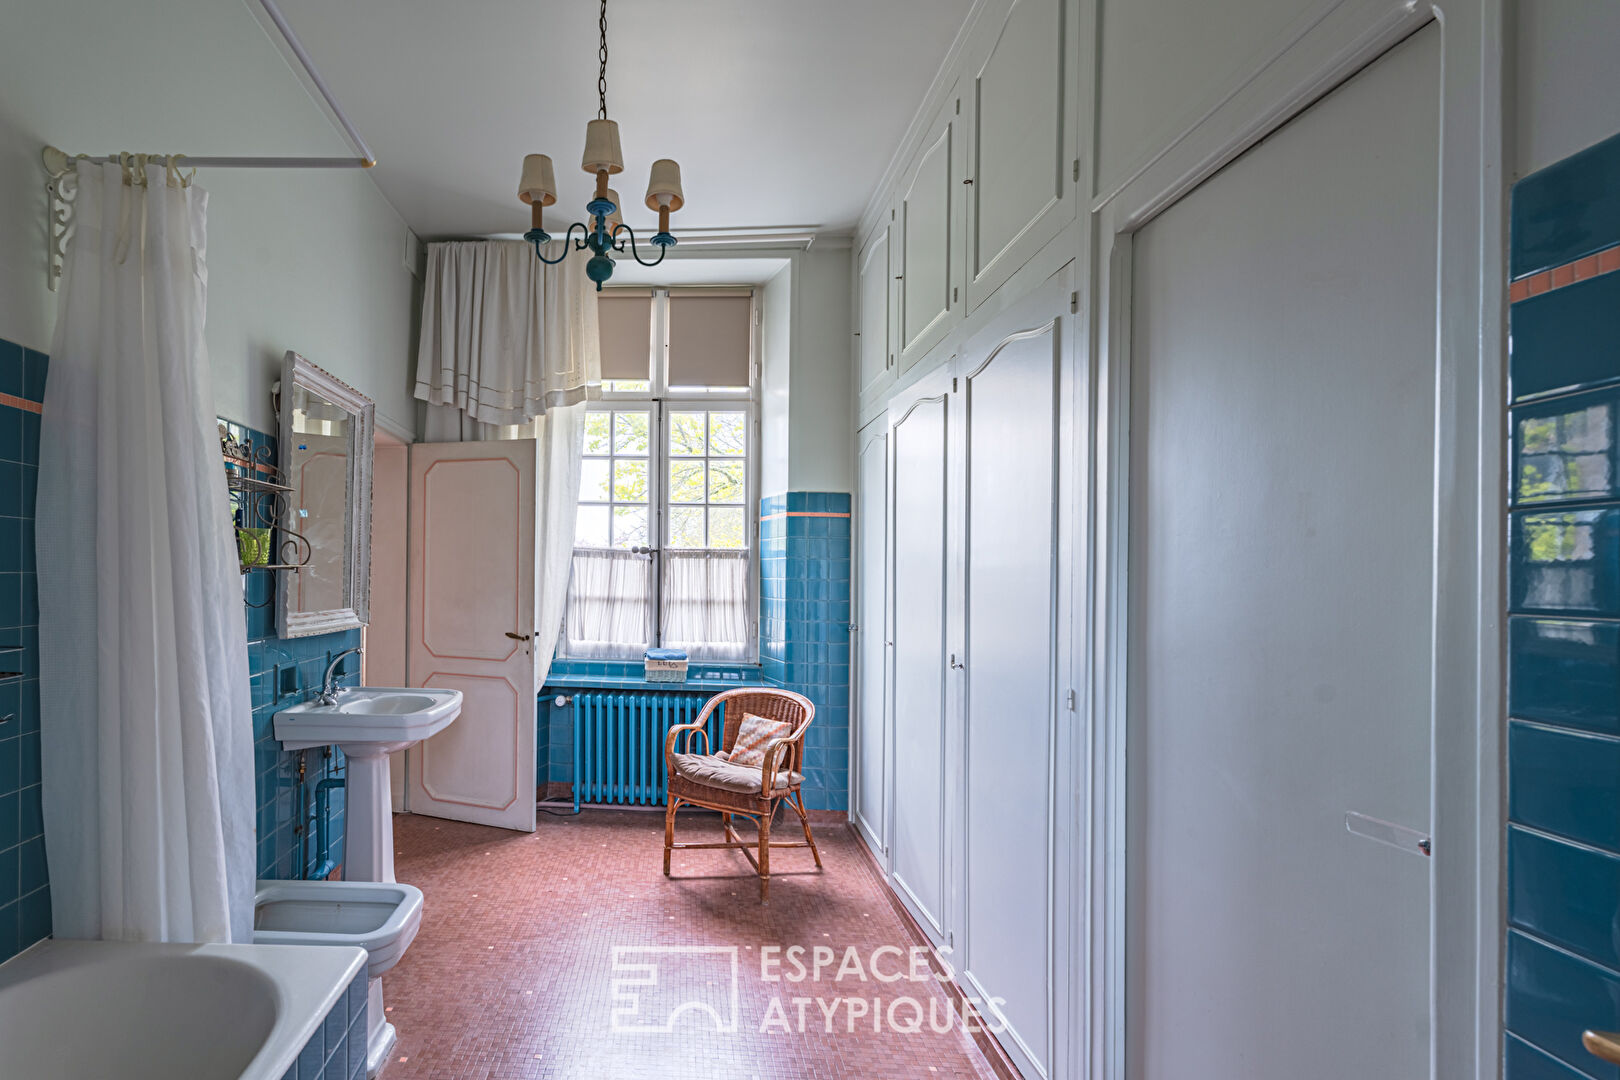 Beautiful 18th century residence in the town center of Valognes